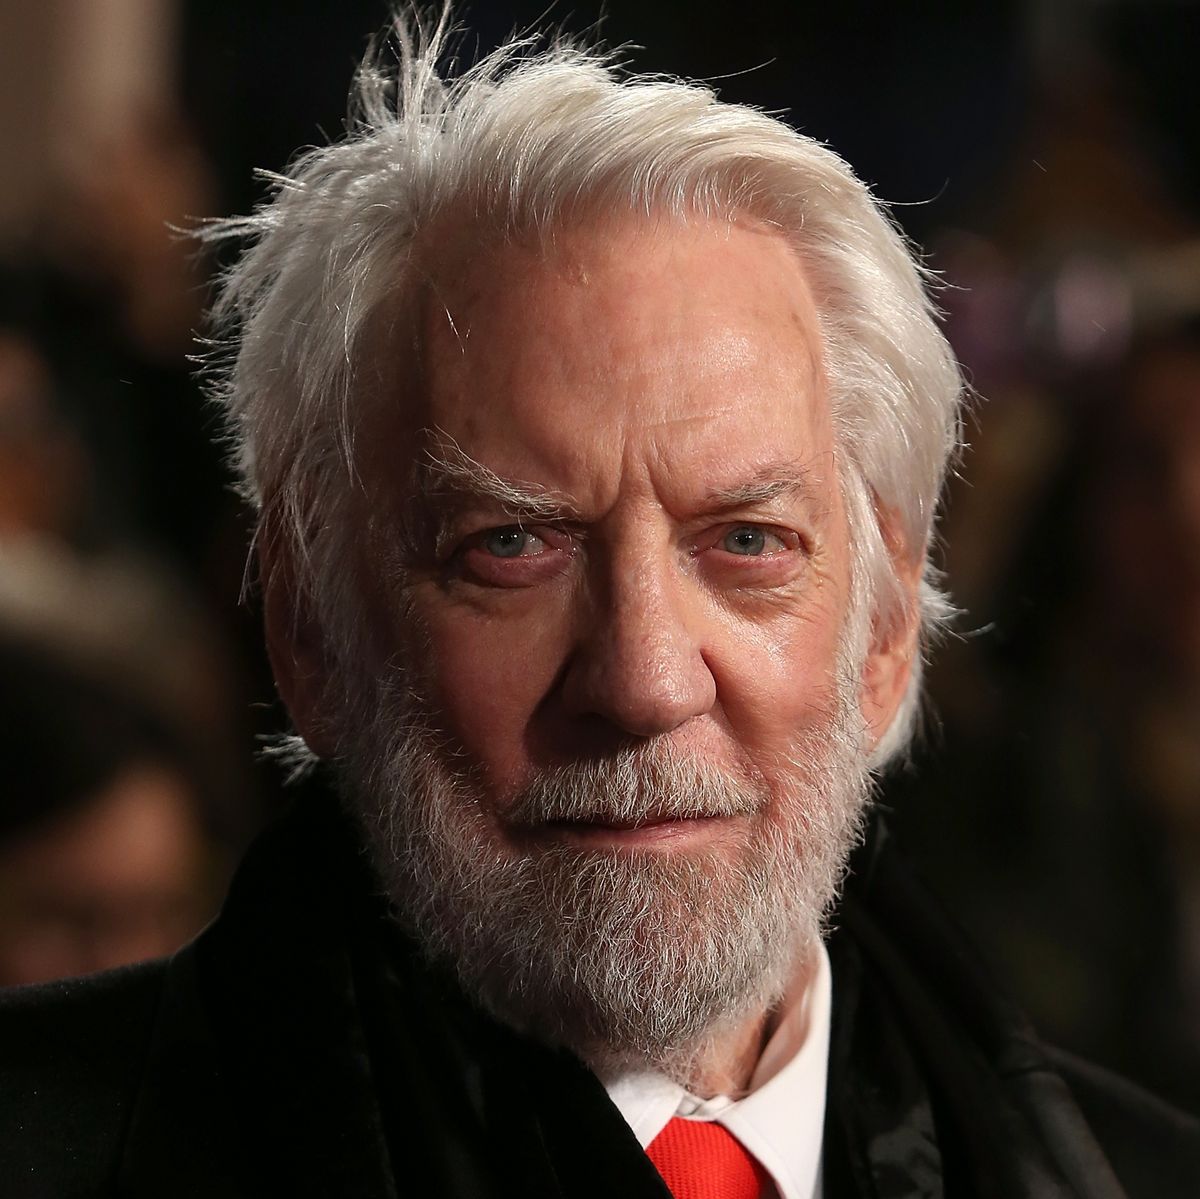 Donald Sutherland photo via Getty Images